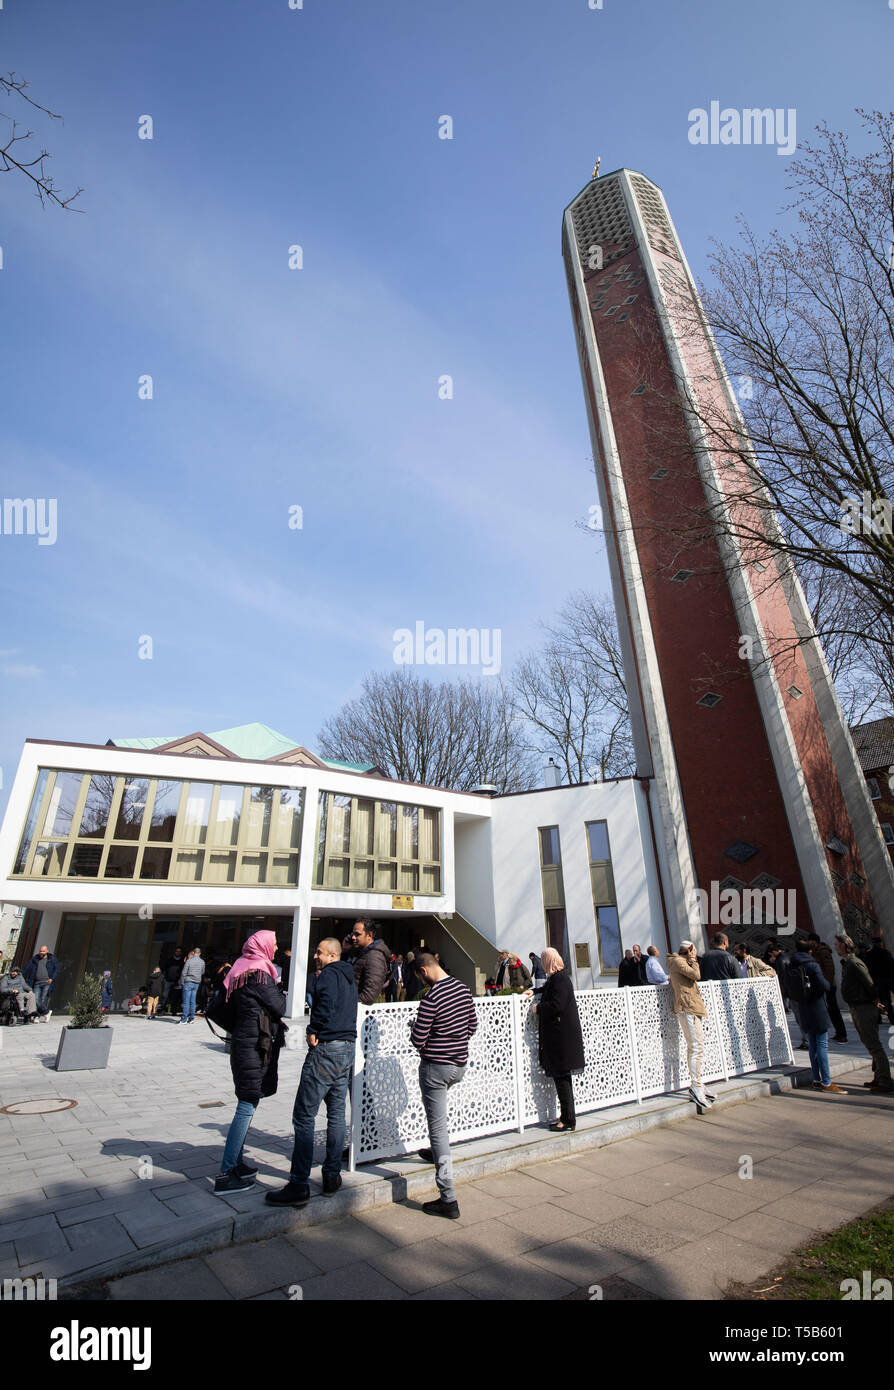 29 March 2019, Hamburg: Exterior view of the Al-Nour-Mosque in the district Hamburg Horn after the Friday prayers. The mosque was rebuilt from the former Protestant Capernaum church and was opened in September 2018. Photo: Christian Charisius/dpa Stock Photo